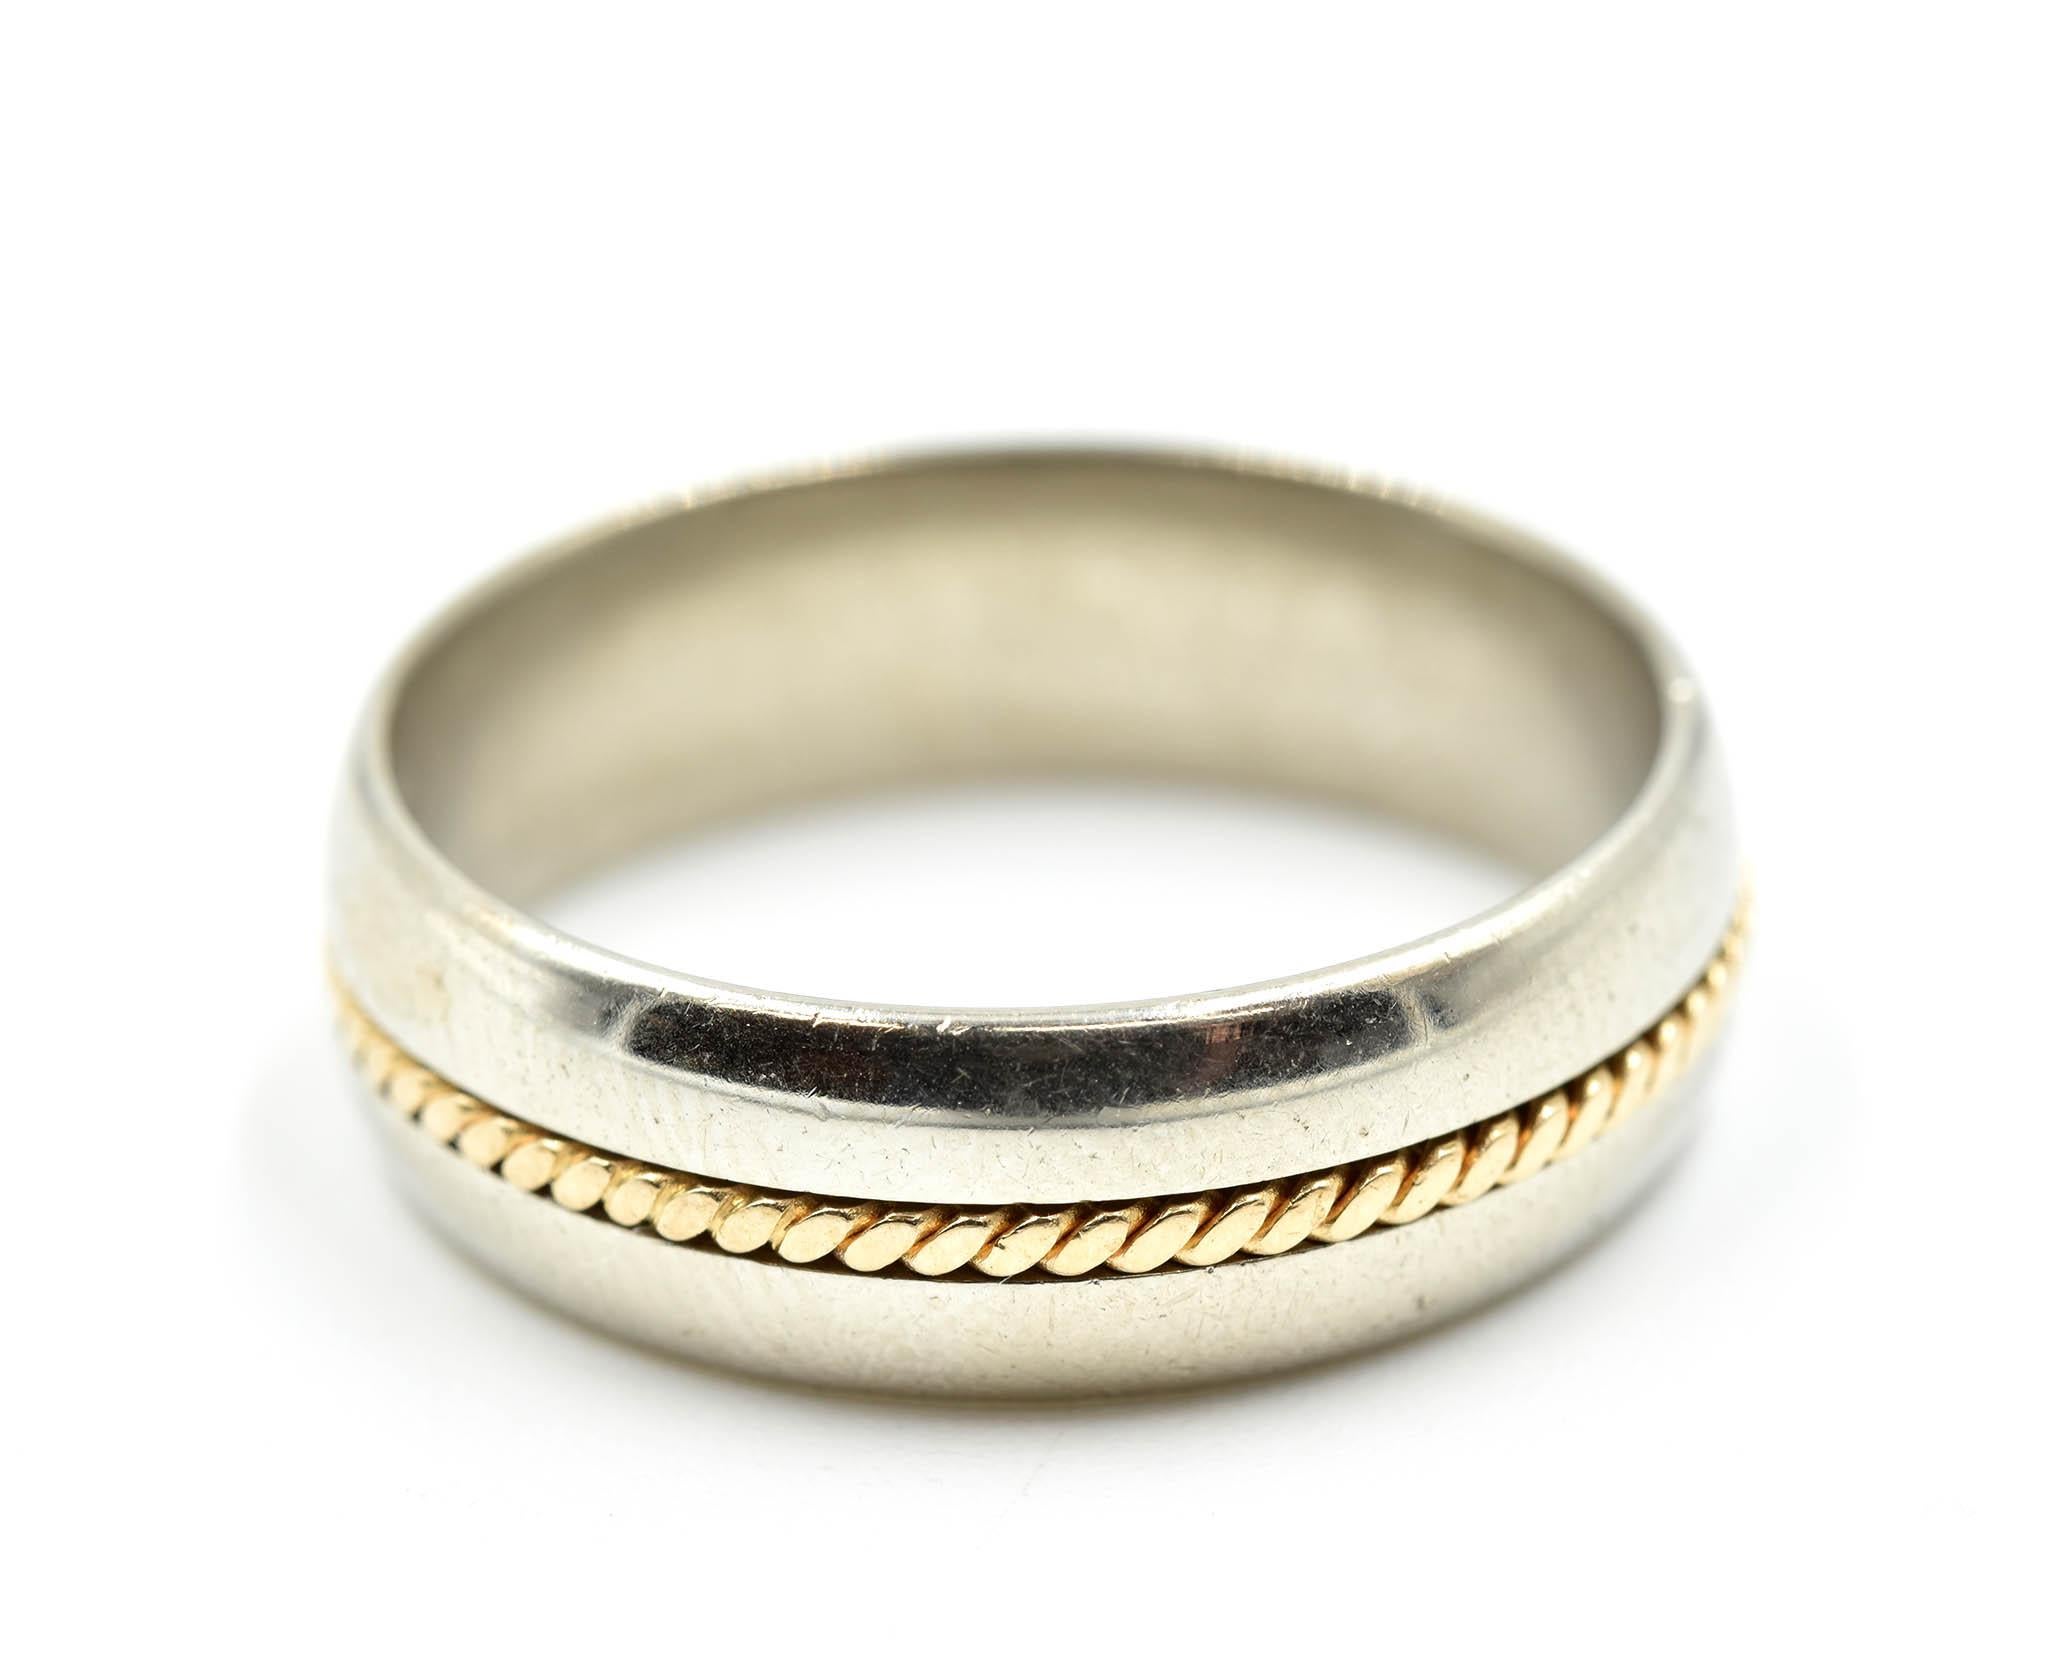 This is a gents wedding band consisting of a 14k yellow gold cable running across the wedding band. The top and bottom of the band is in a high polished 14k white gold. The band measures 6.65mm wide. Band size is 8.5 and total weight is 6.3 grams.